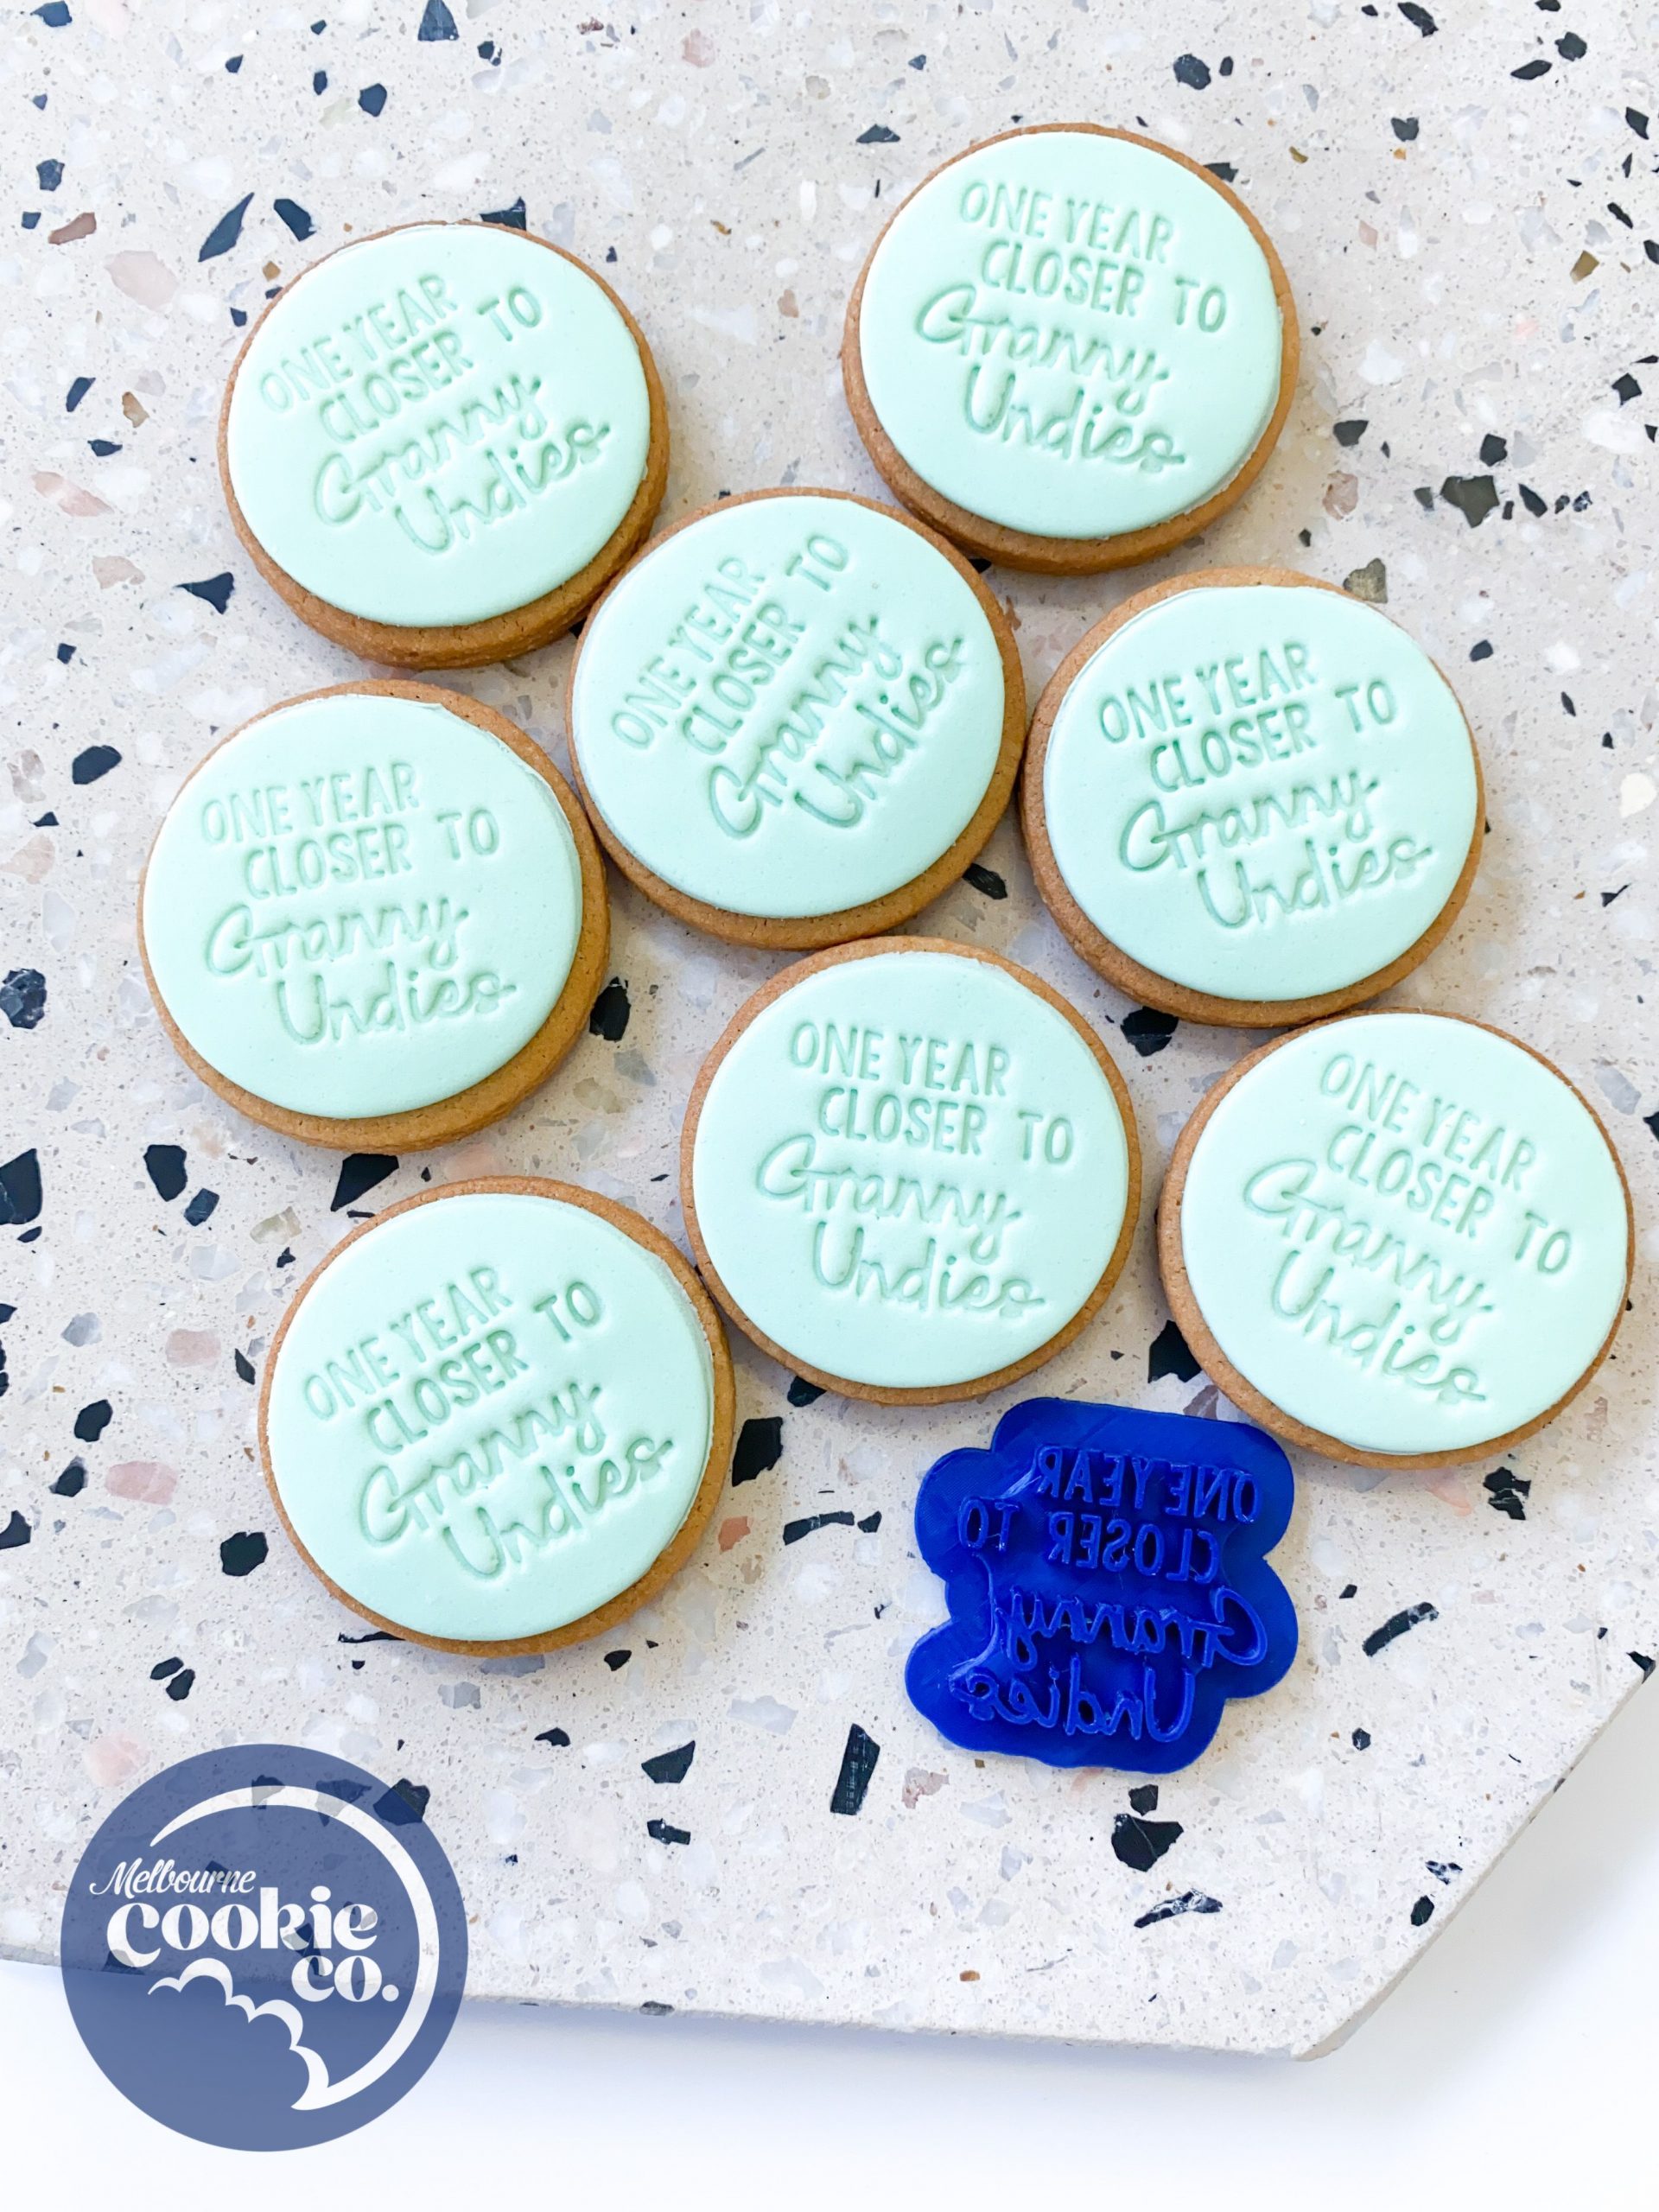 One Year Closer to Granny Undies Mini Embosser - Melbourne Cookie Co